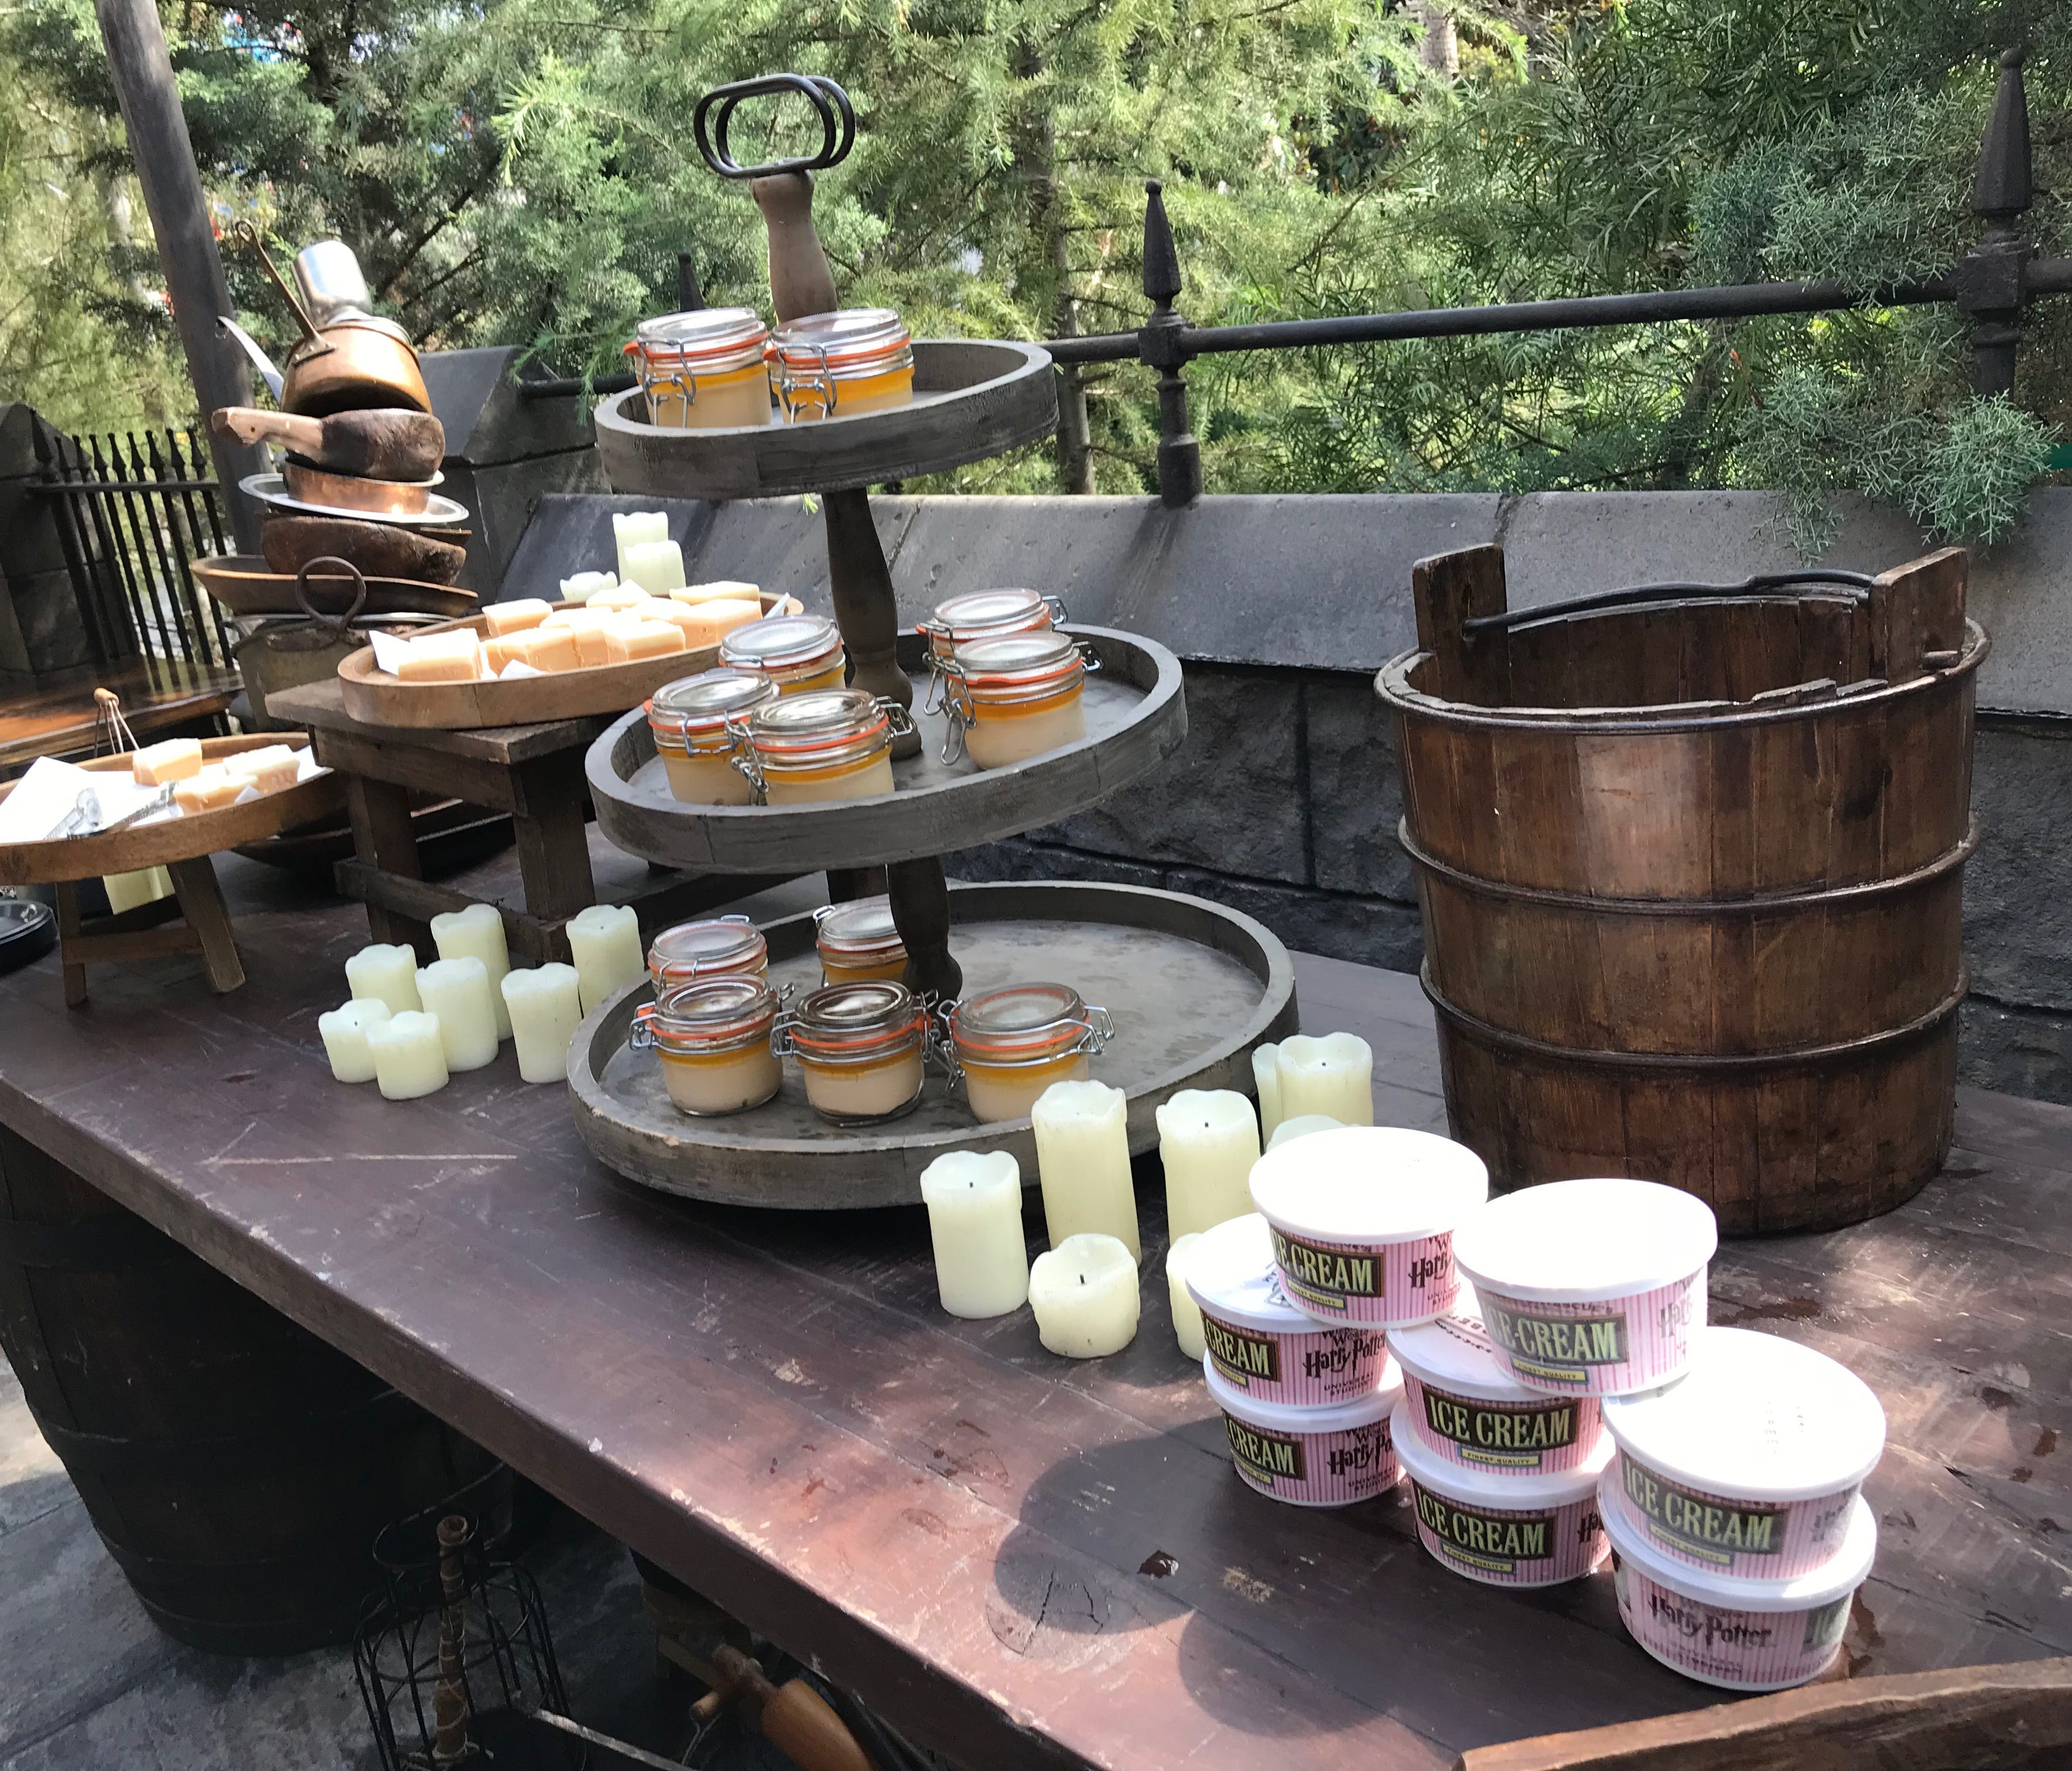 There are plenty of Butterbeer desserts available at Universal Studios Hollywood now: Fudge, Potted Cream and Ice Cream